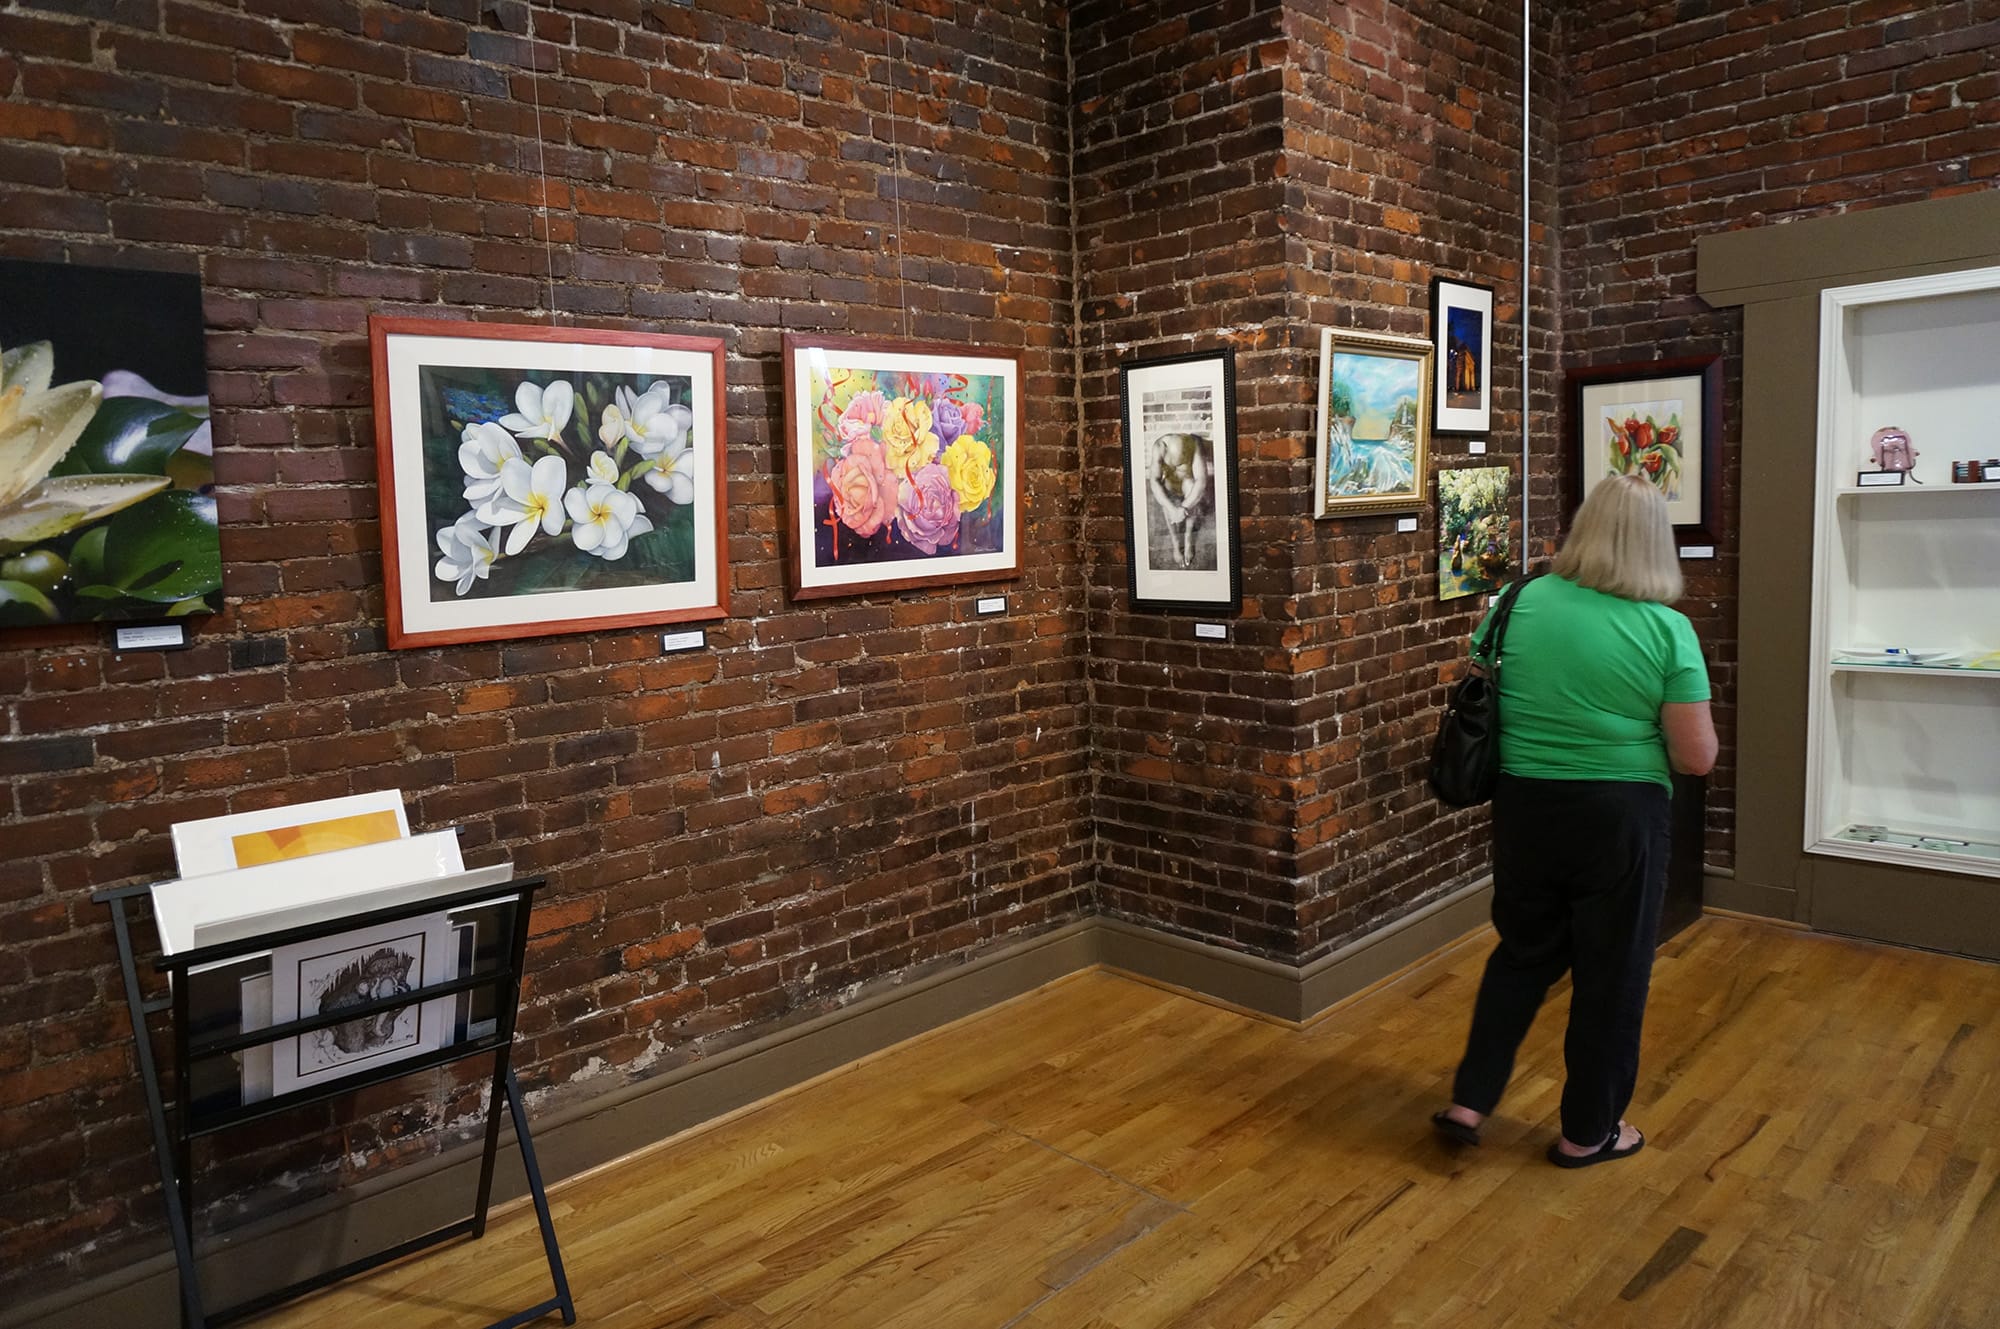 A visitor walks through Gallery 360's Art in the Heart exhibit earlier this month, the second-to-last art show at the Ninth Street location before the gallery closes in early September.